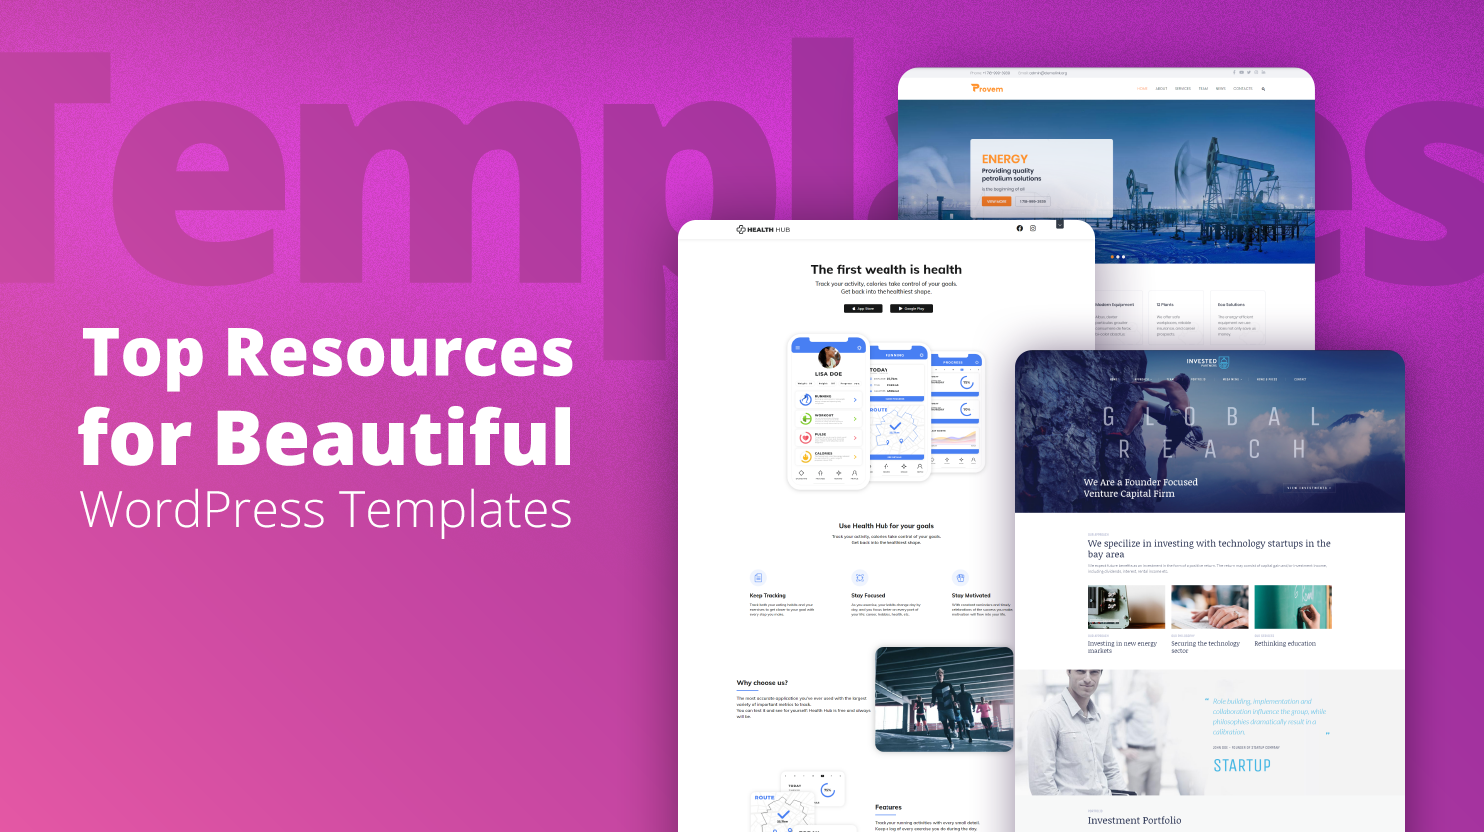 Top Resources for Beautiful WordPress Templates